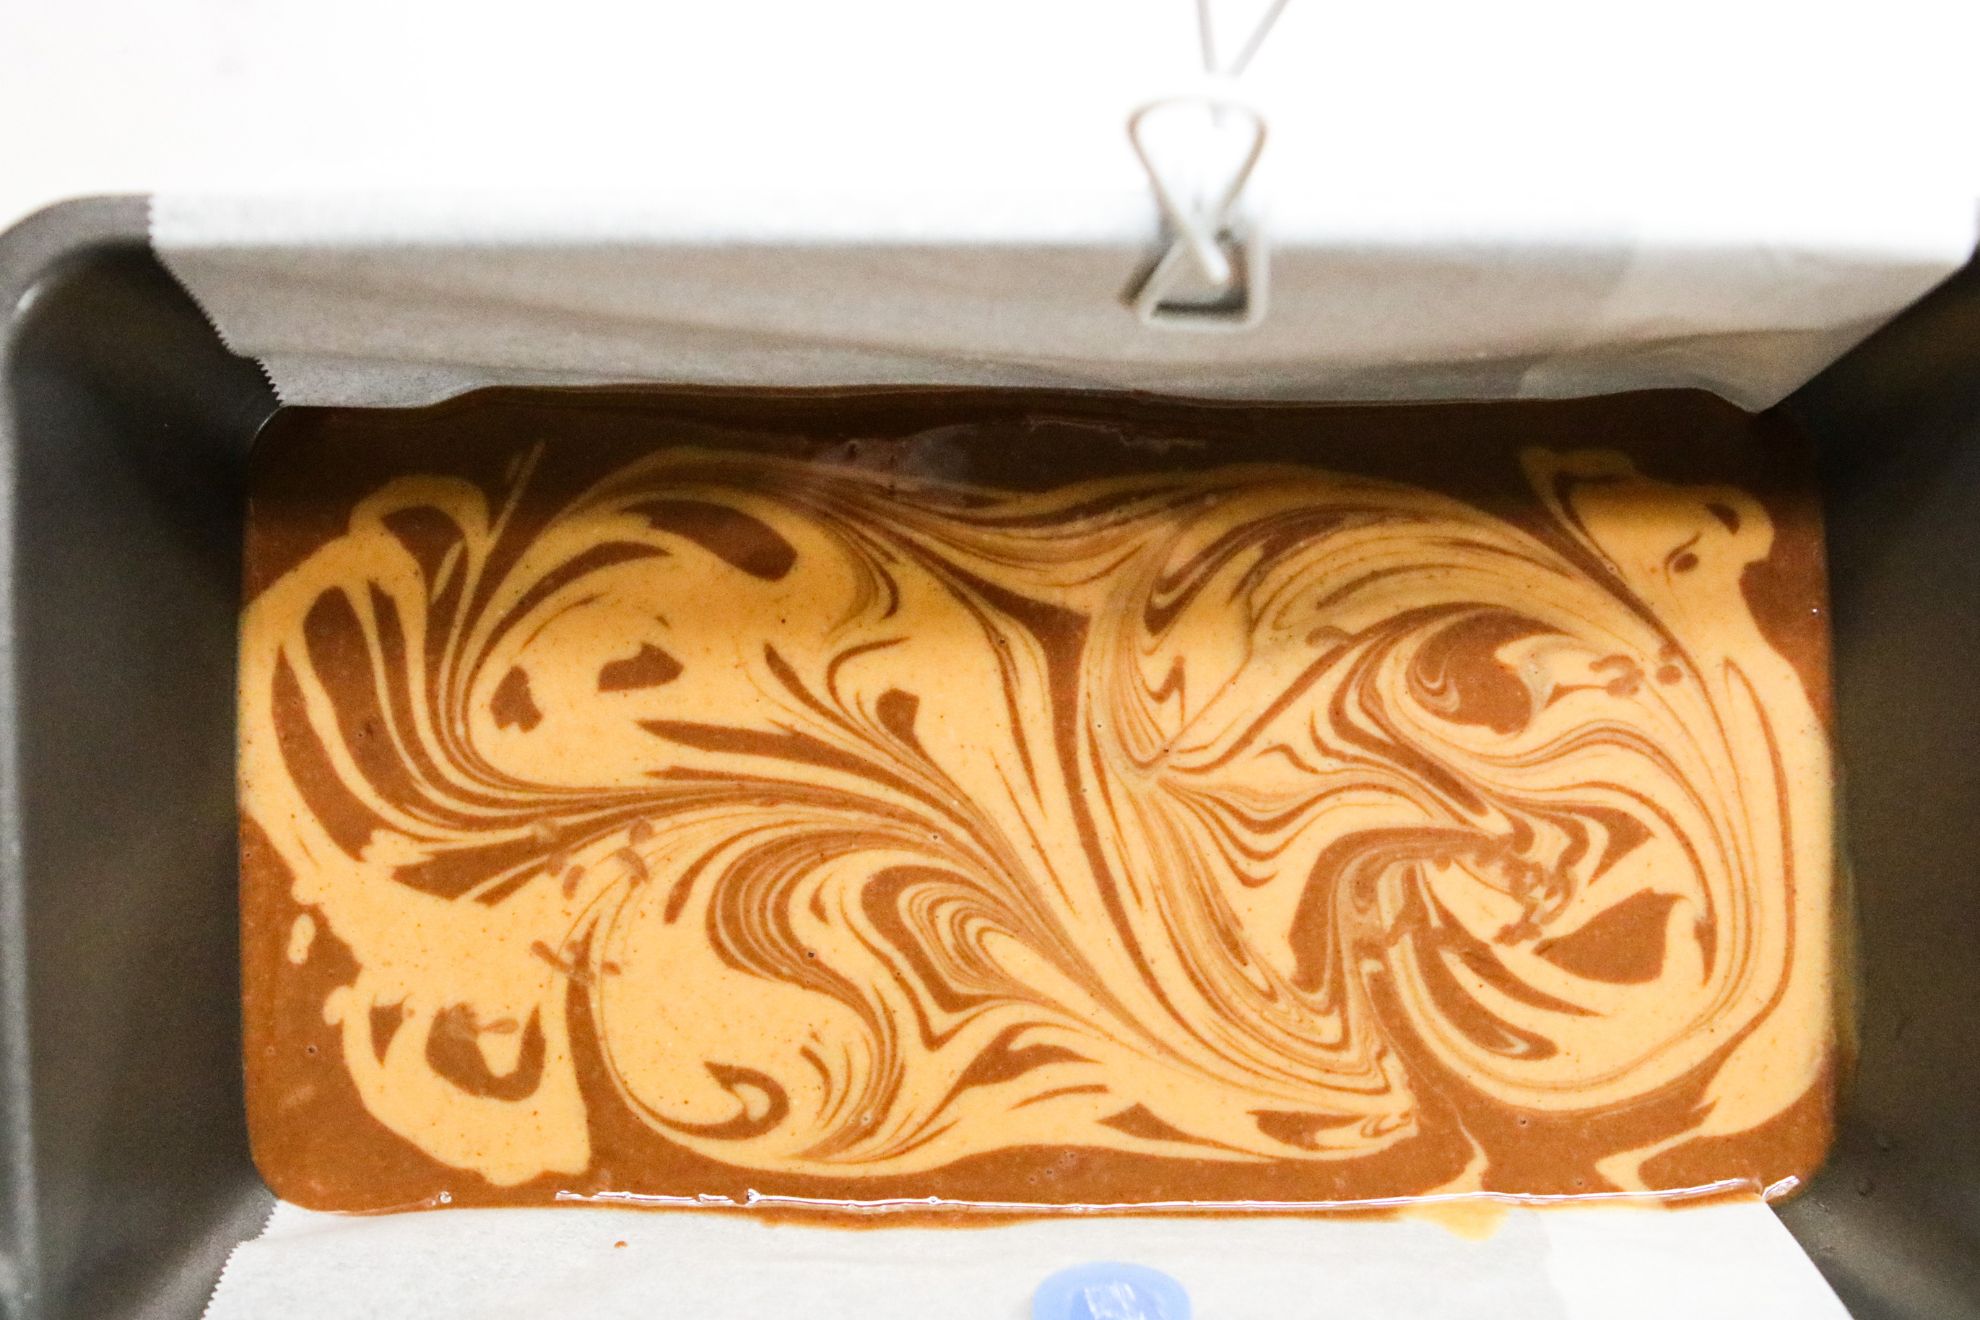 This is an overhead image of a bread pan with parchment paper sitting on a white counter. Inside the bread pan is a chocolate mixture with peanut butter swirls.